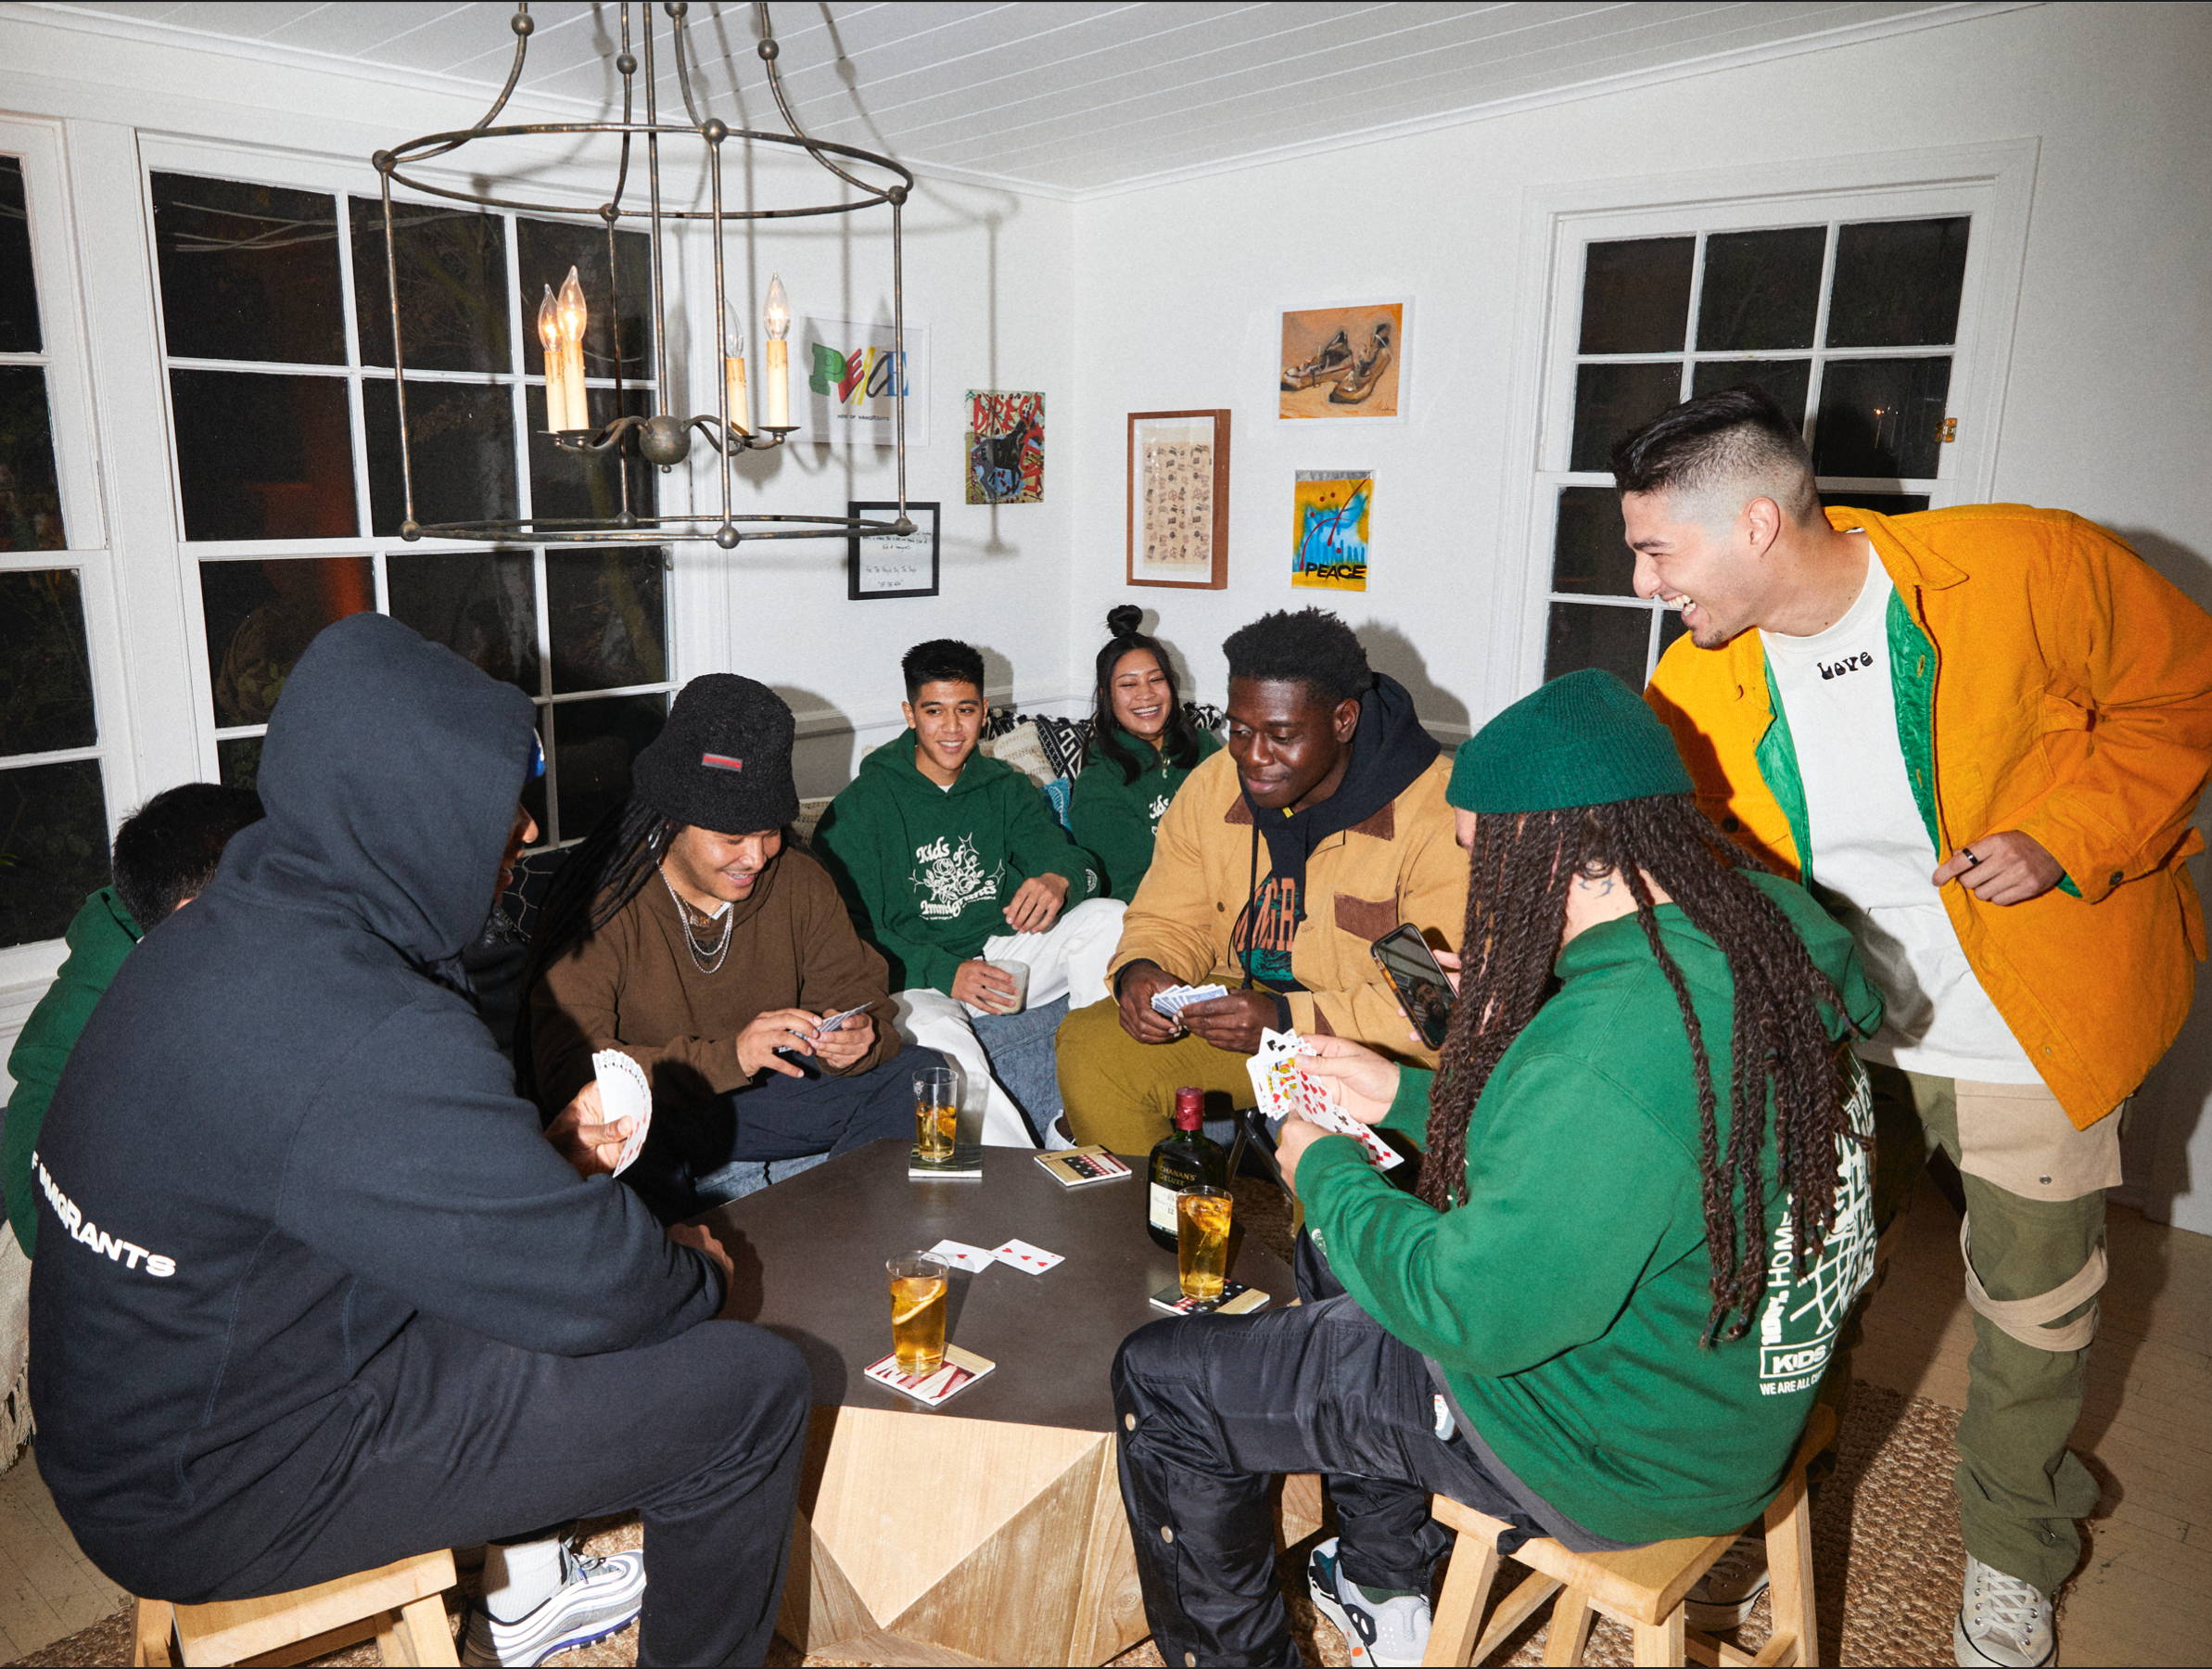 Group of people playing cards while wearing Kids of Immigrants hoodies and tees